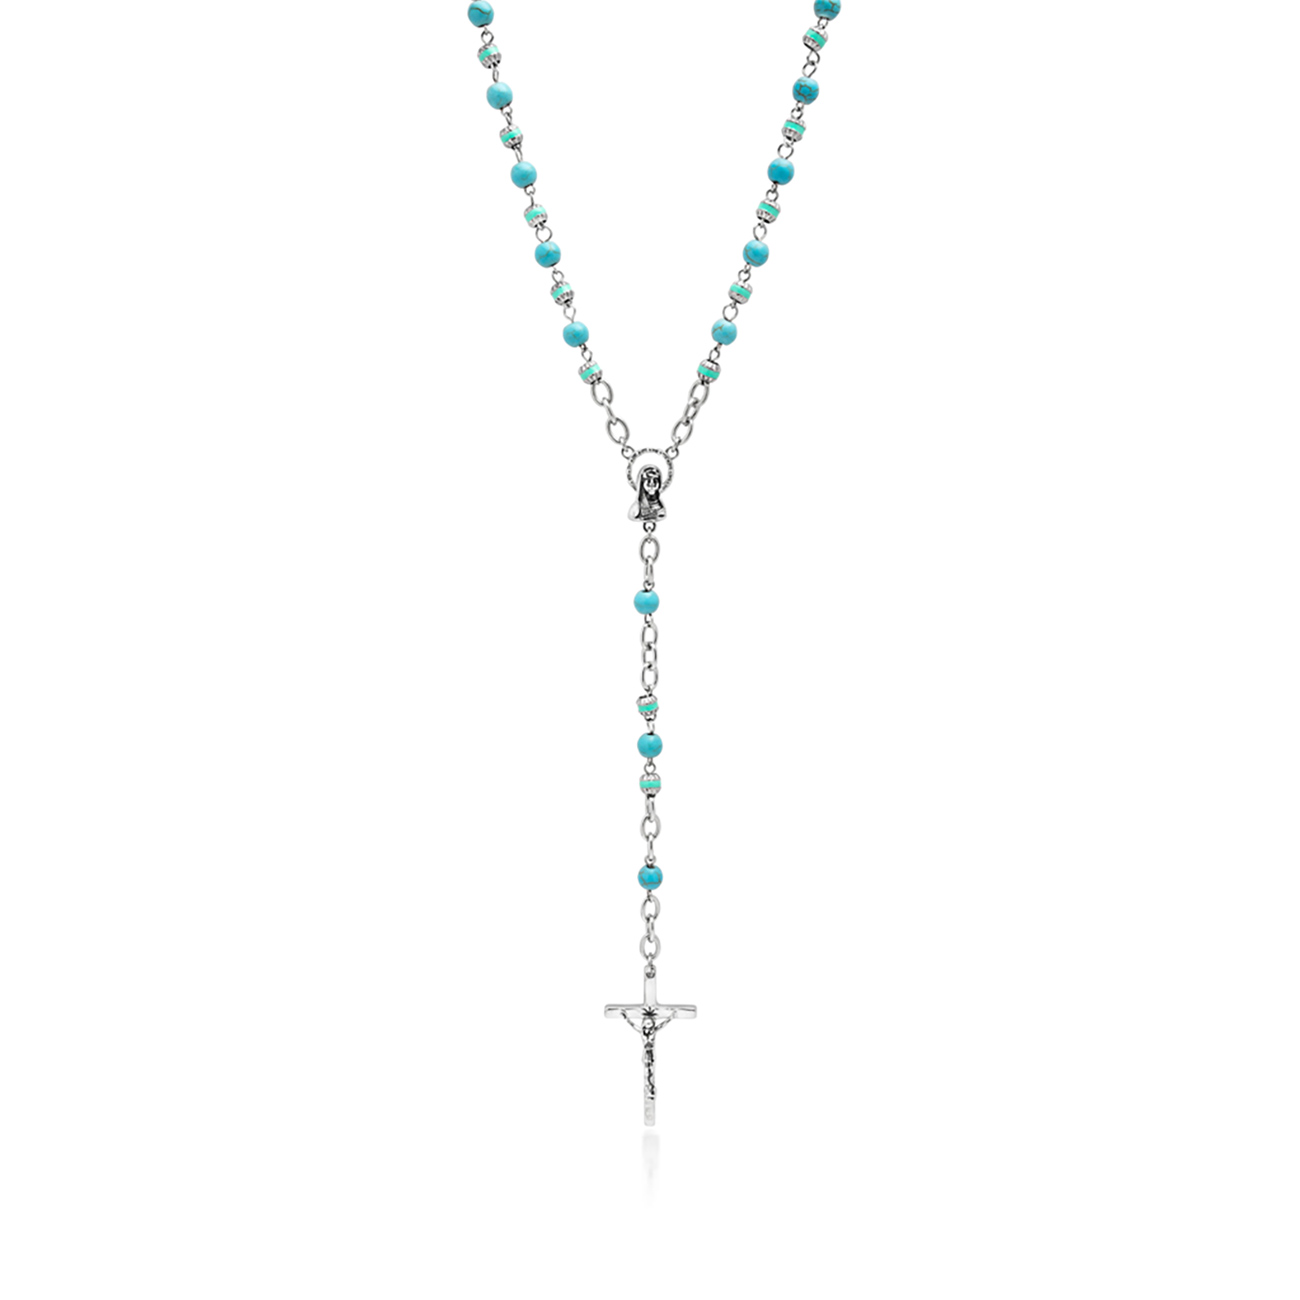 Nialaya Men's Rosary Necklace with Turquoise